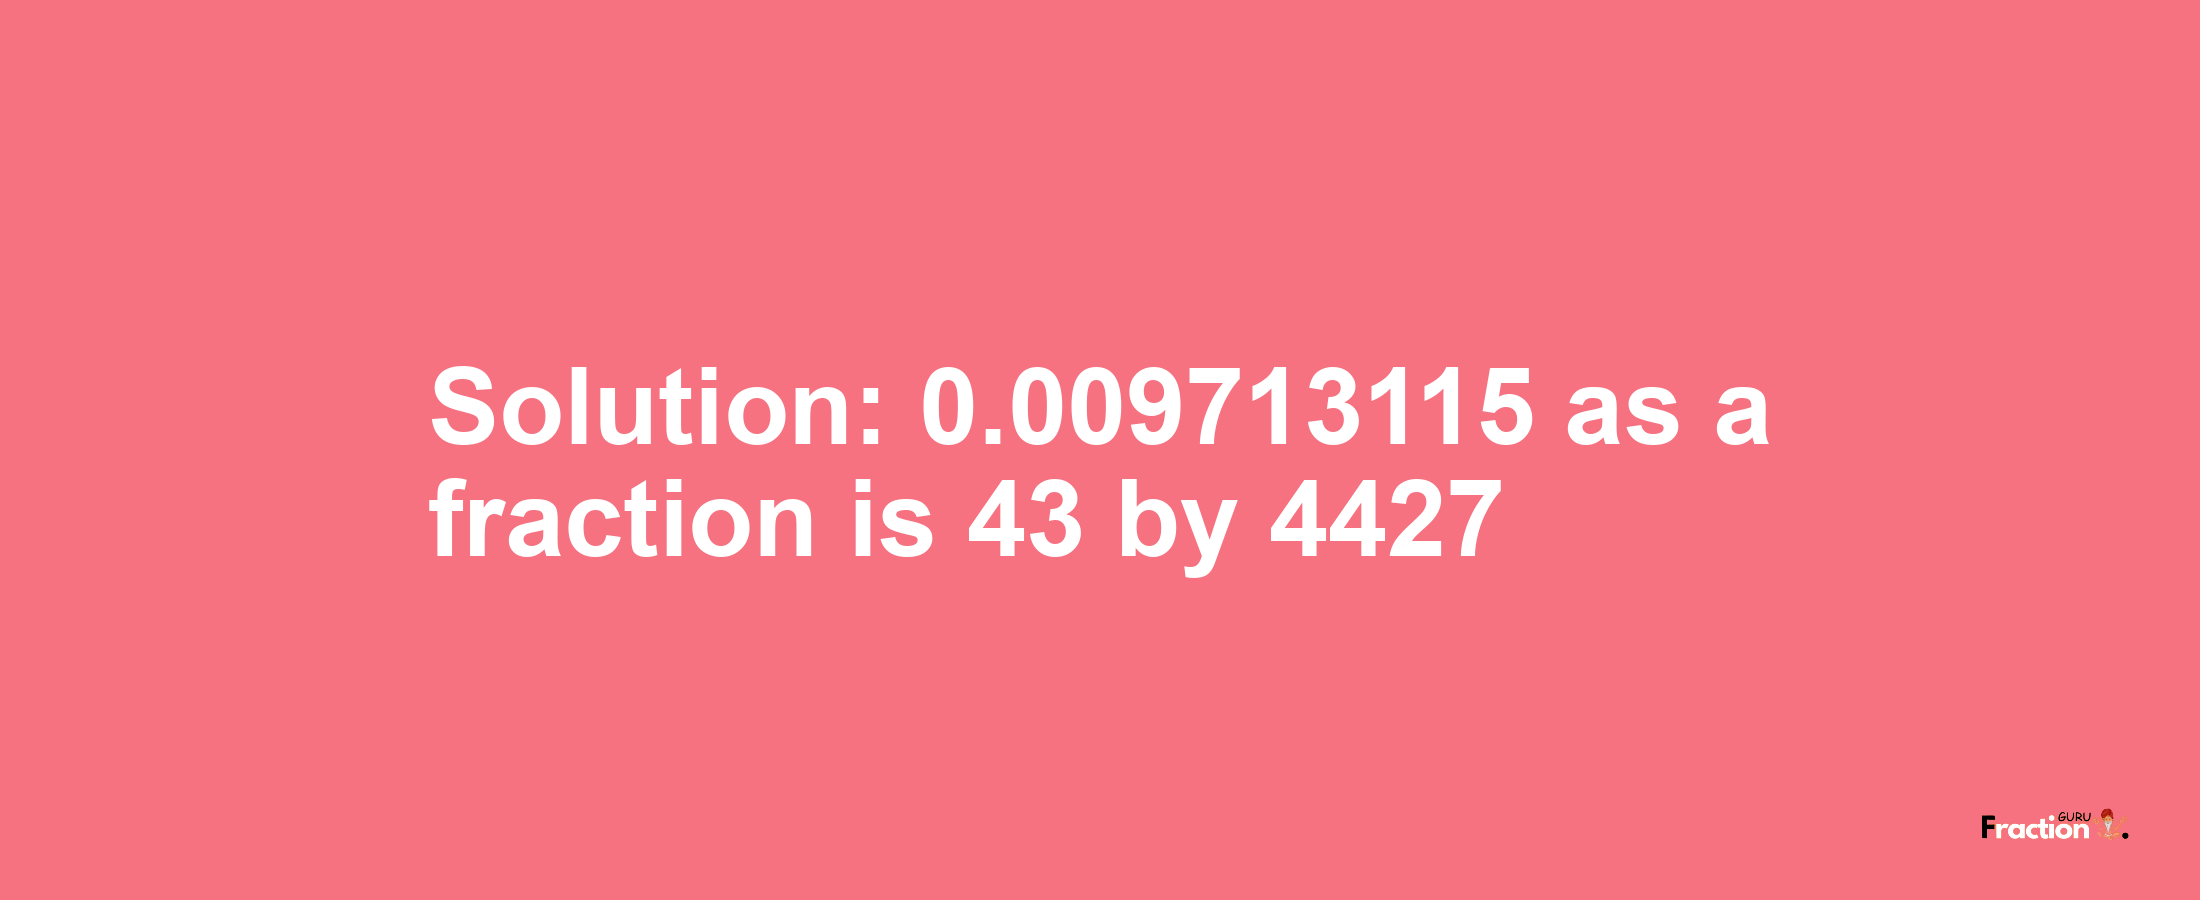 Solution:0.009713115 as a fraction is 43/4427